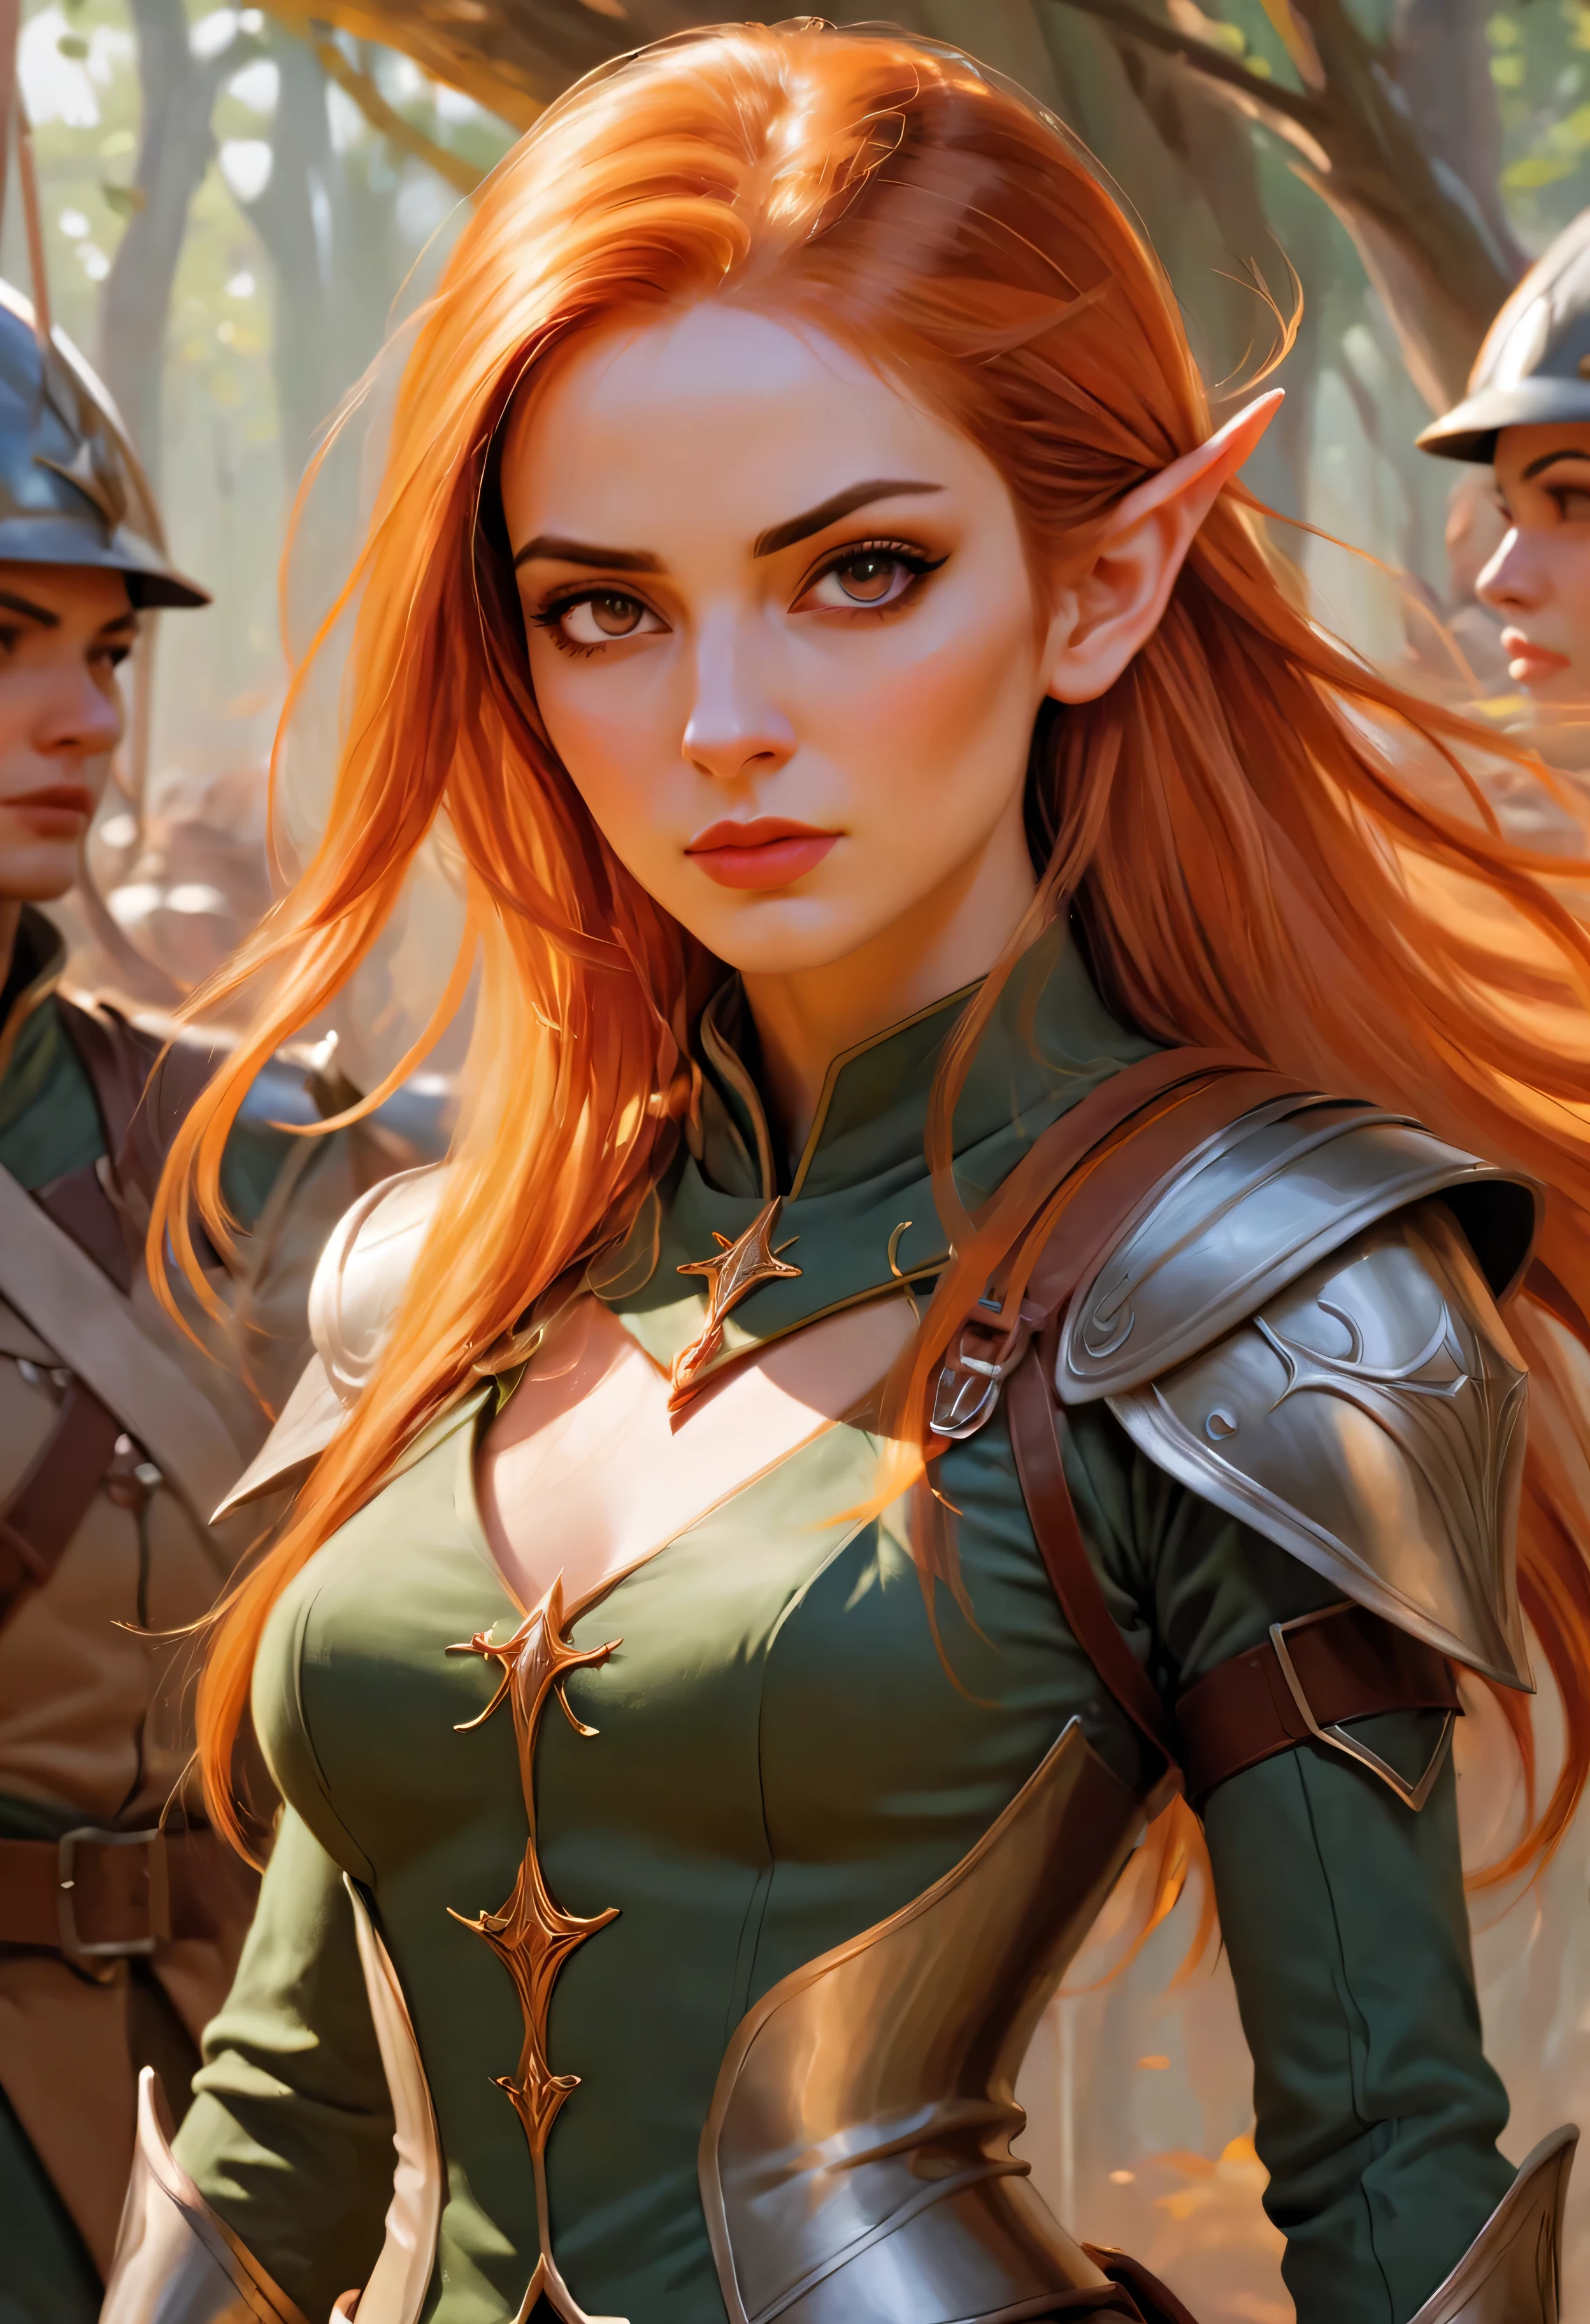 ((Majestic_uniform):1.2), ((Expressive_face:1.2), ((Pretty Elven Soldier):1.1), ((Hourglass_figure):1.1). ((Stand Ready):1.3), | Smooth lines, showing expressions and postures through contrast, Drawing of Auburn Elven Female soldier, fine art piece, hot topic, figurative art, fantasy painting.